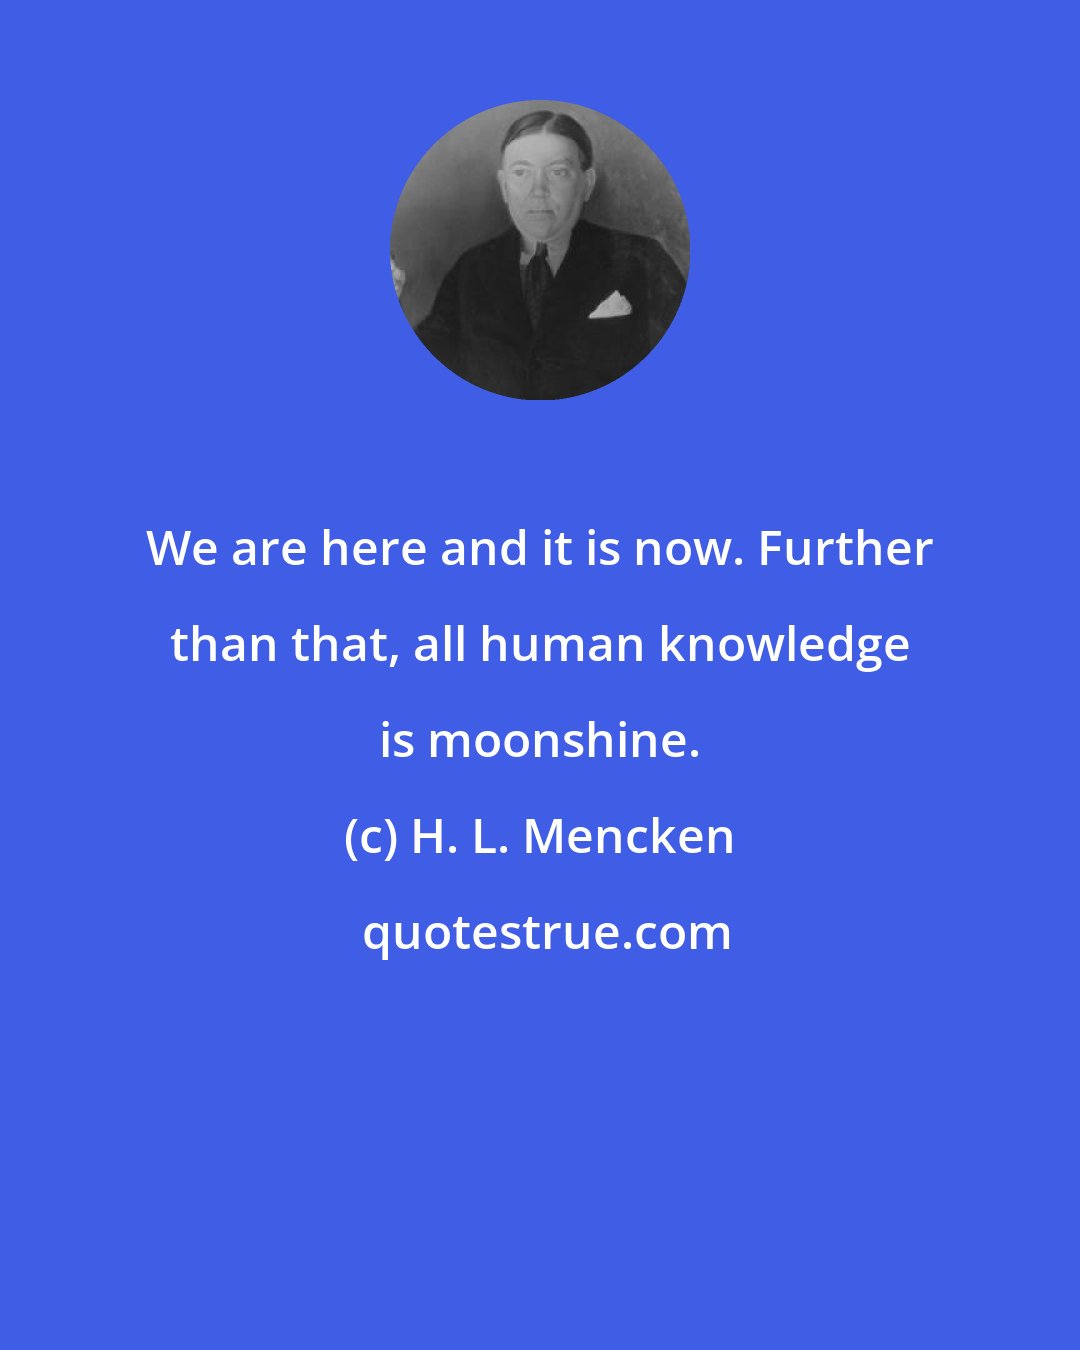 H. L. Mencken: We are here and it is now. Further than that, all human knowledge is moonshine.